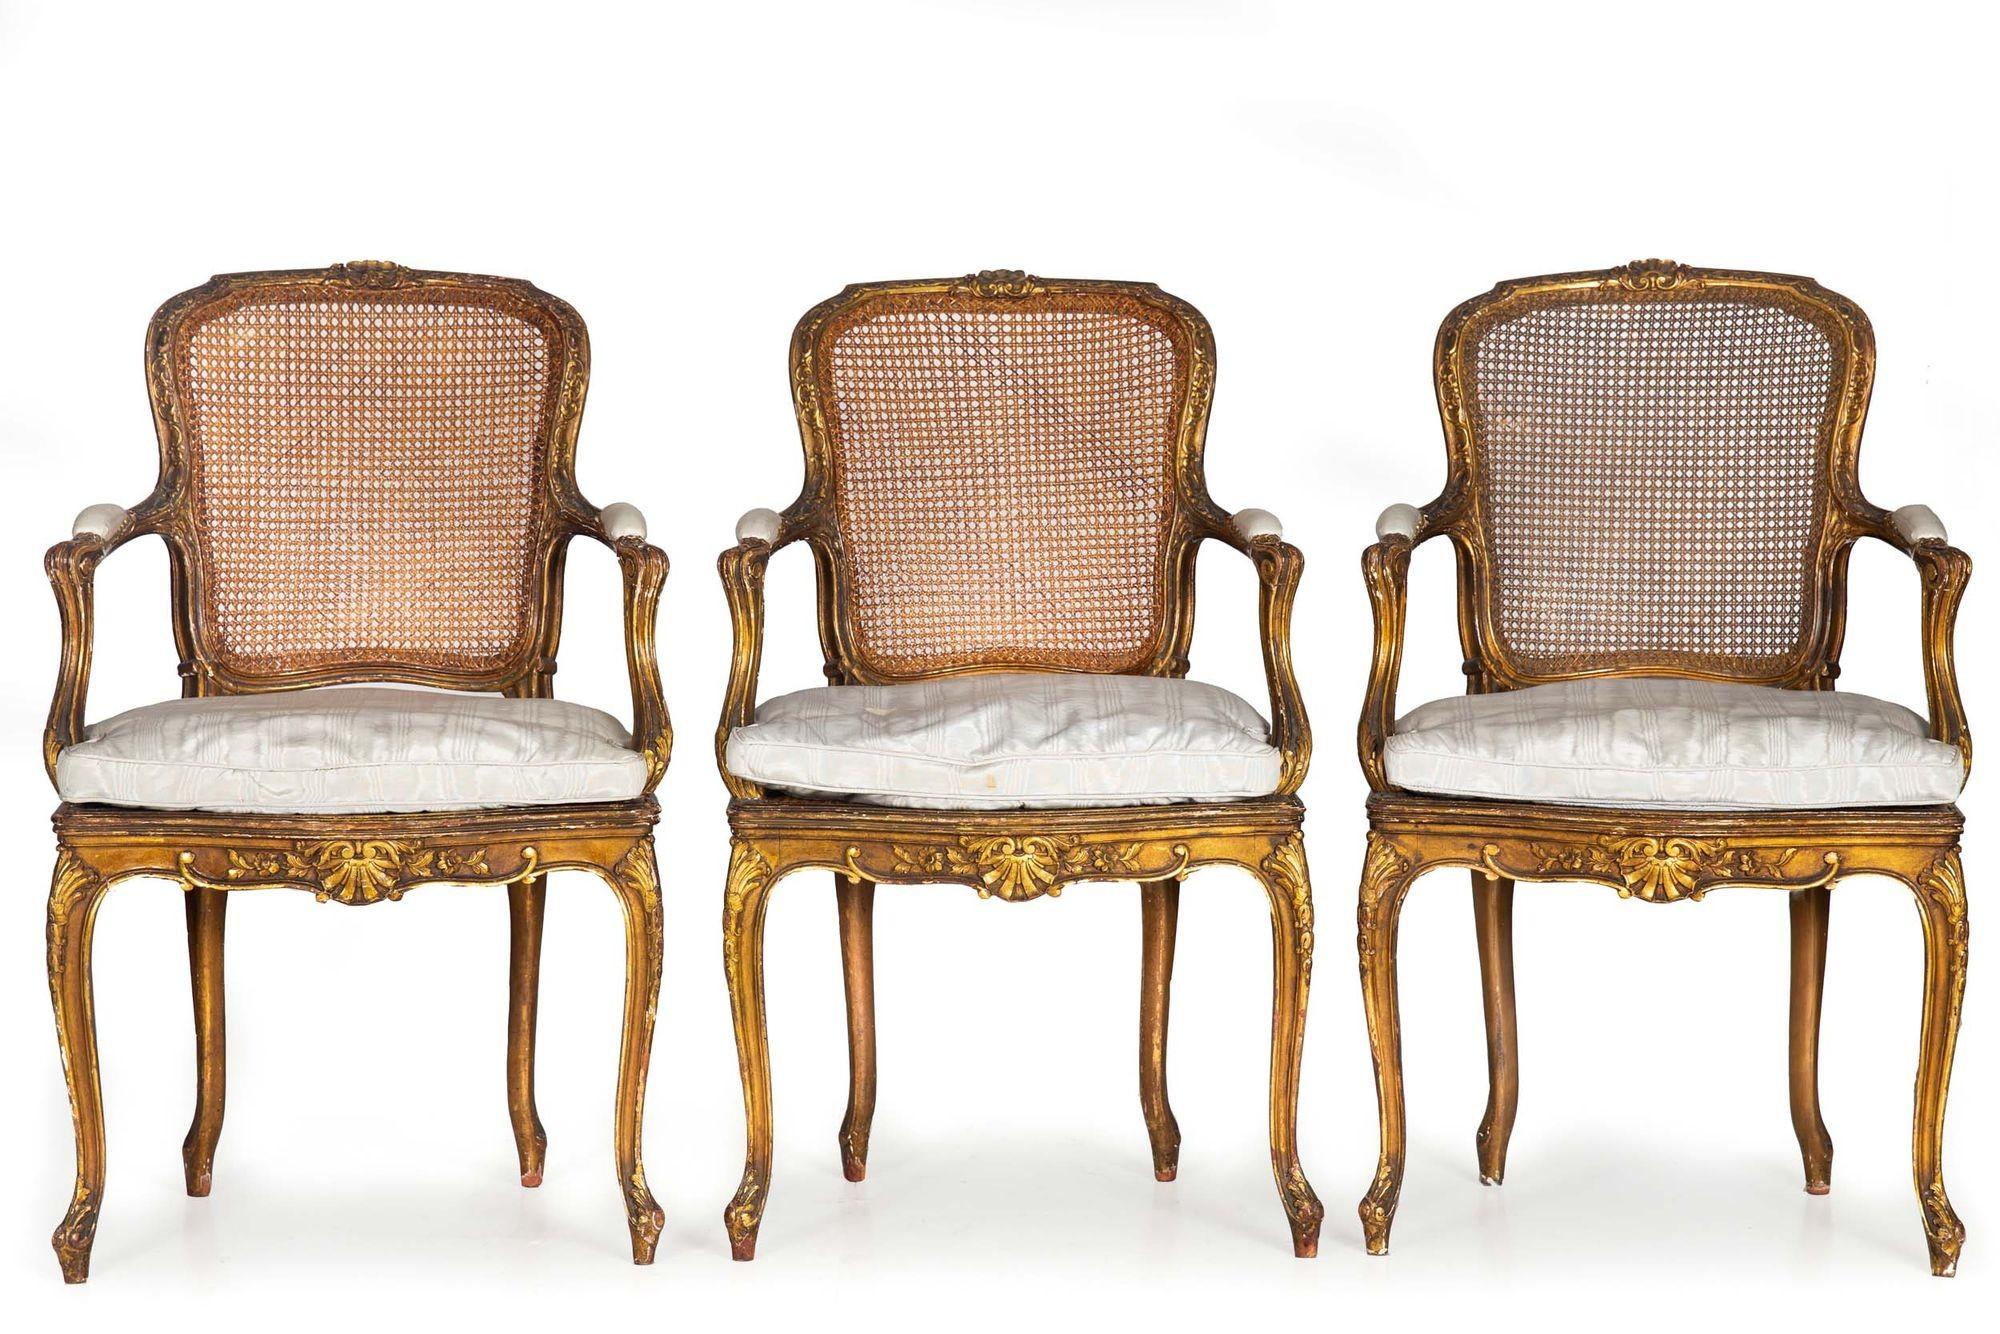 FRENCH LOUIS XV STYLE CARVED POLYCHROME AND GILT CANED DINING CHAIRS  SET OF 12
European  probably circa 1930
Item # 311LZP30P
An absolutely gorgeous set that remains remarkably complete, retaining a full twelve chairs, they are beautifully carved